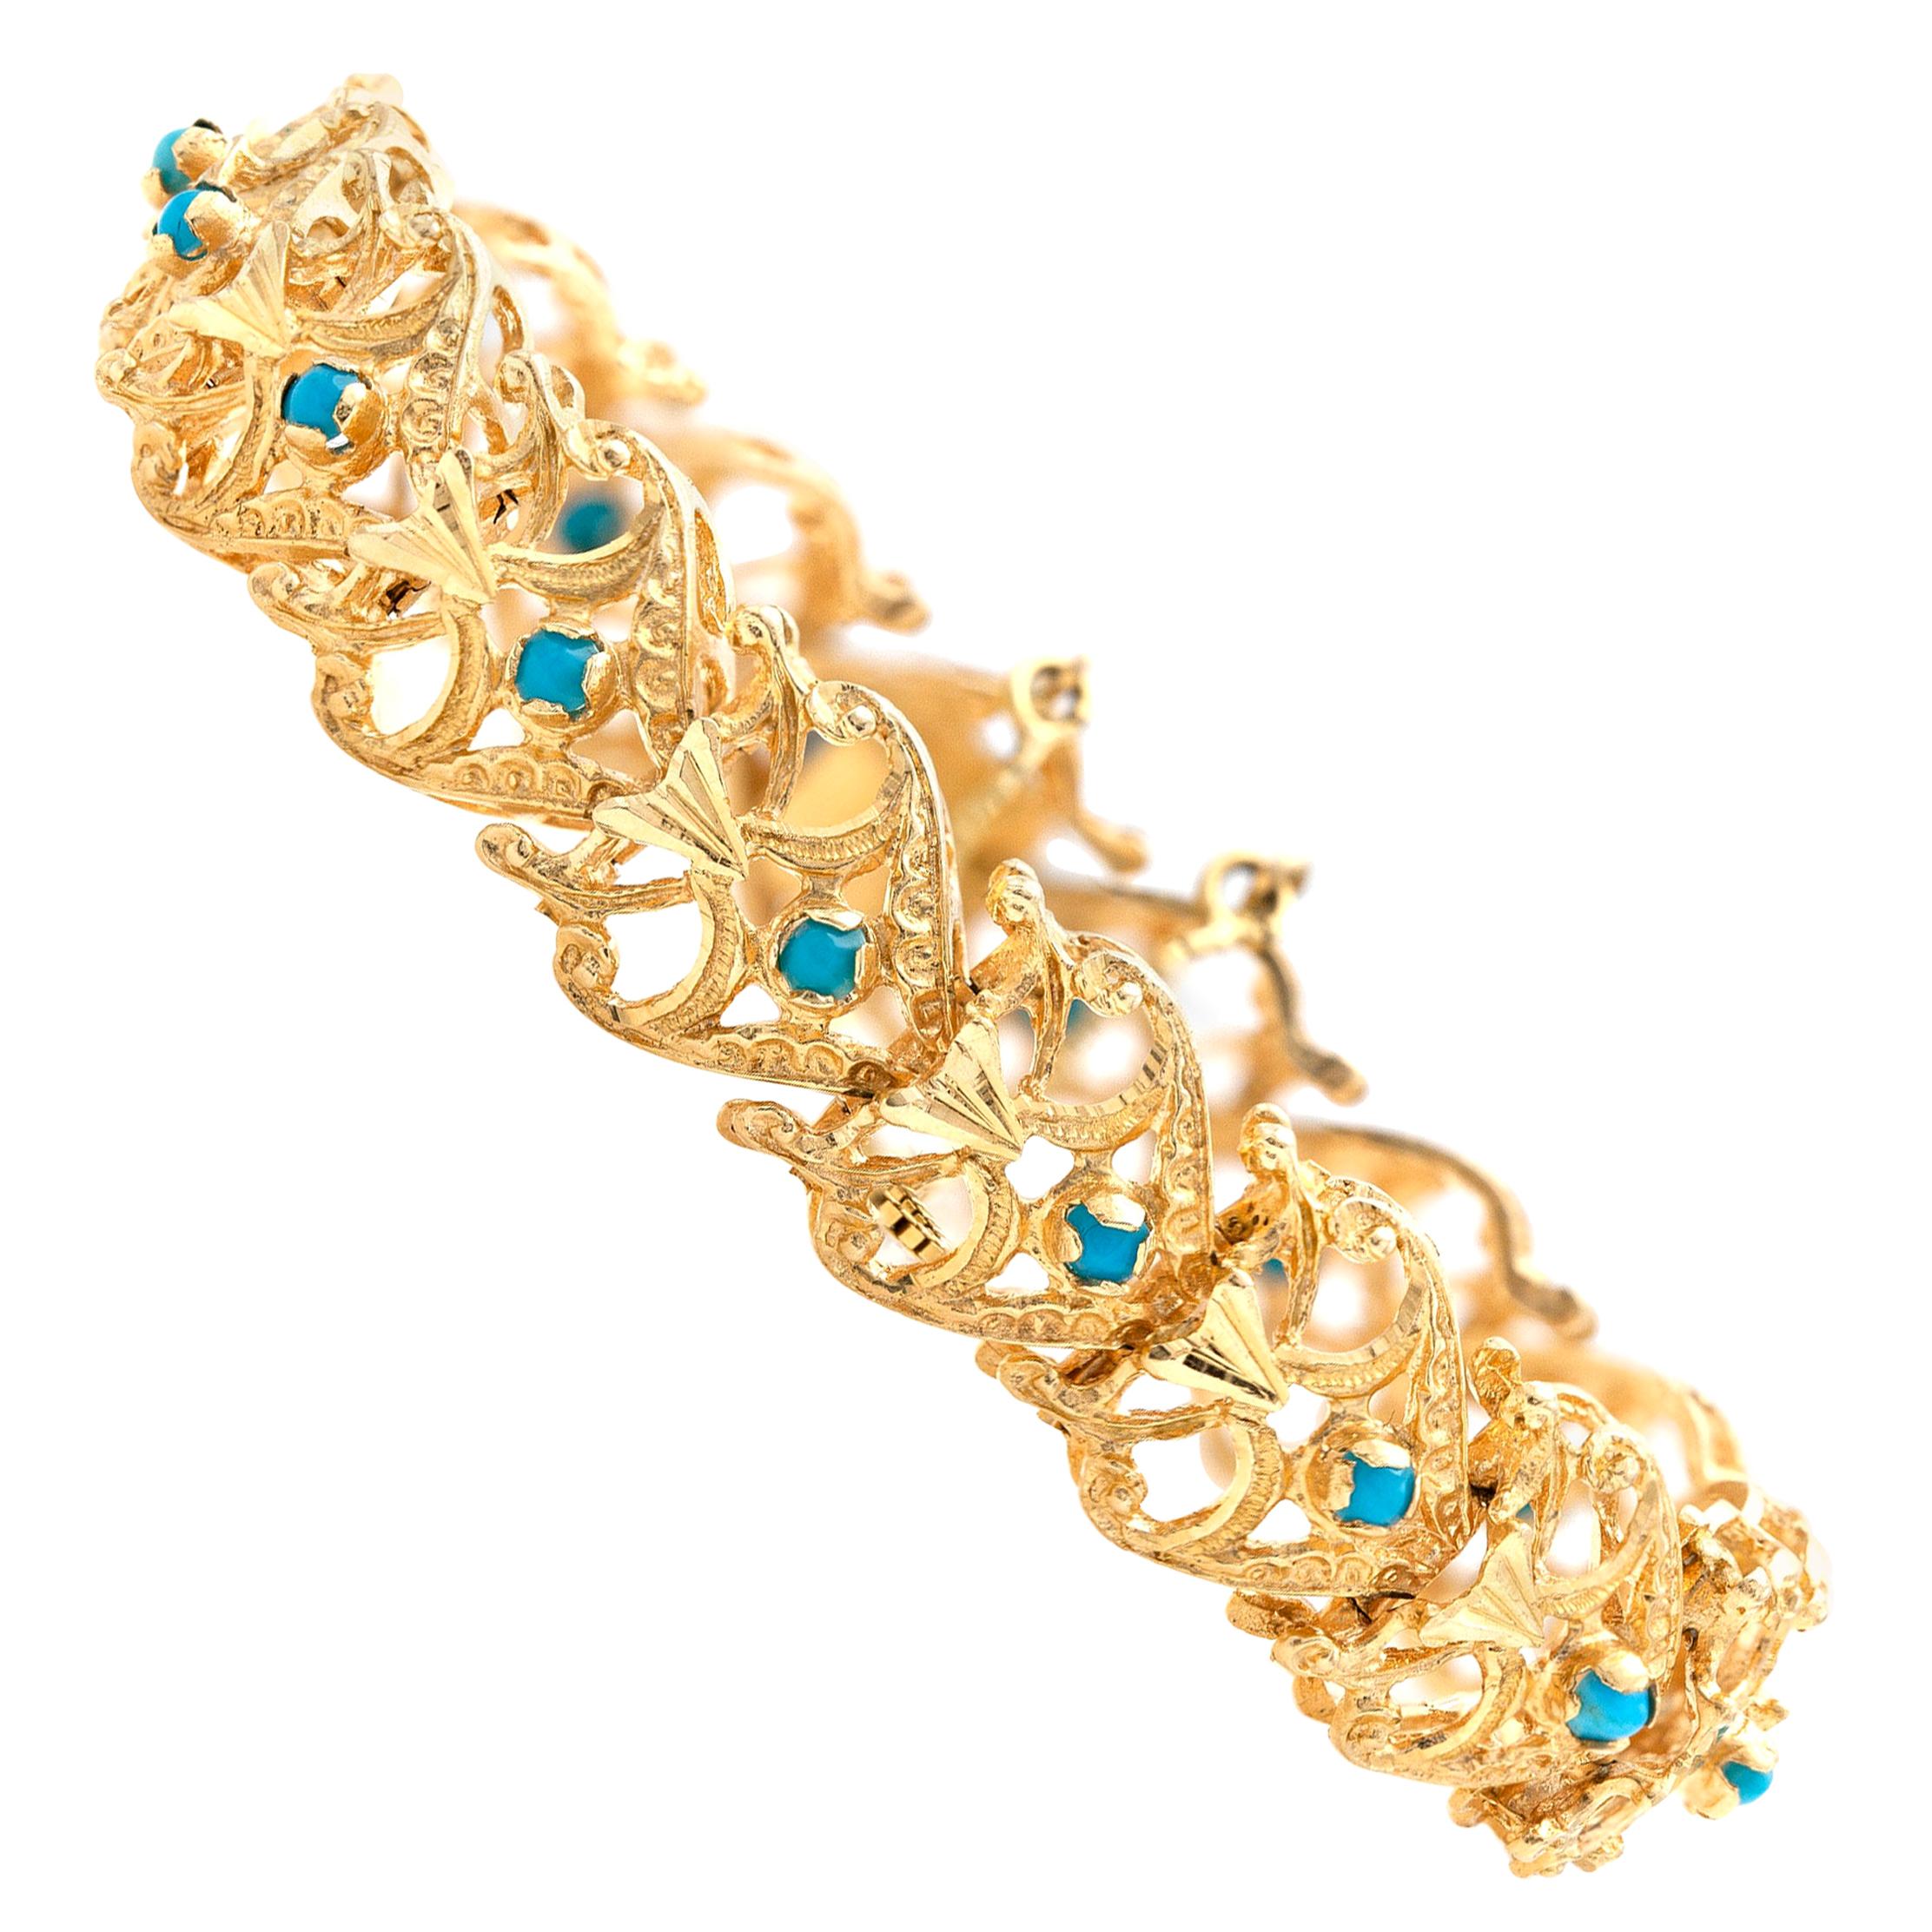 Gold Bracelet with Turquoise Beads